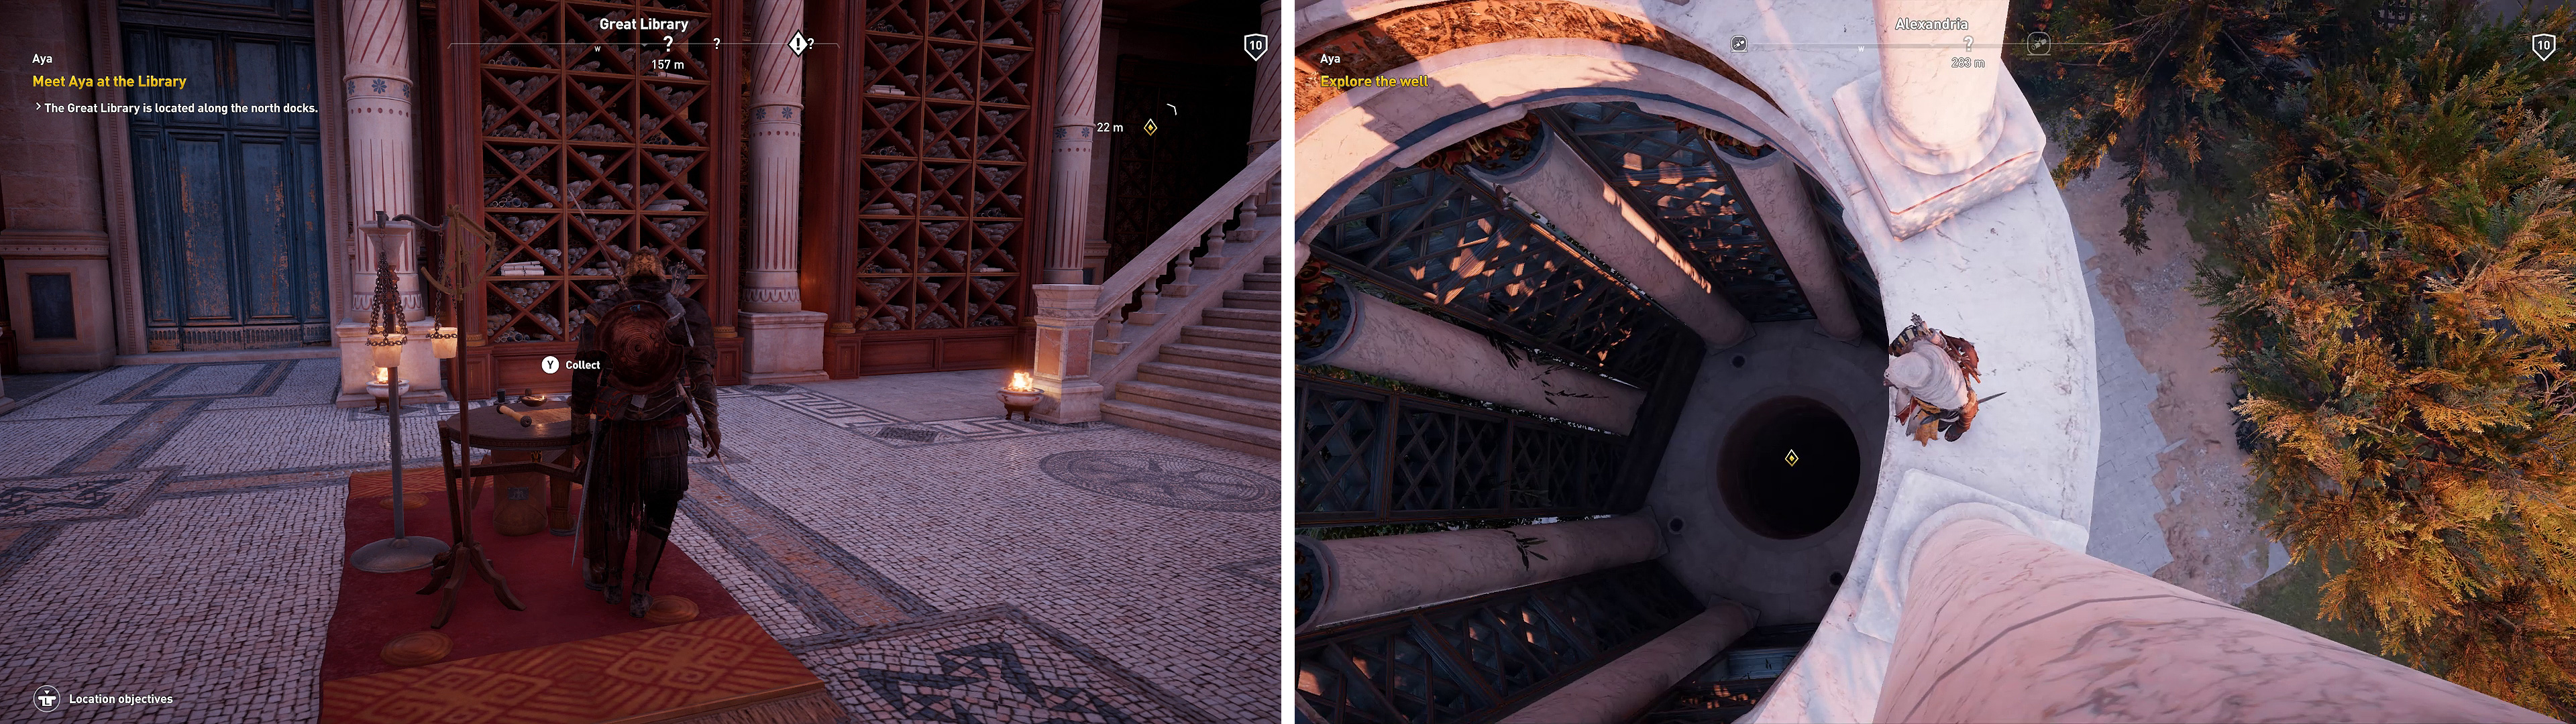 You can find the Papyrus Scroll on a table at the center of the library (left). To find Aya, climb to the top of the vine covered tower (right) and jump in.